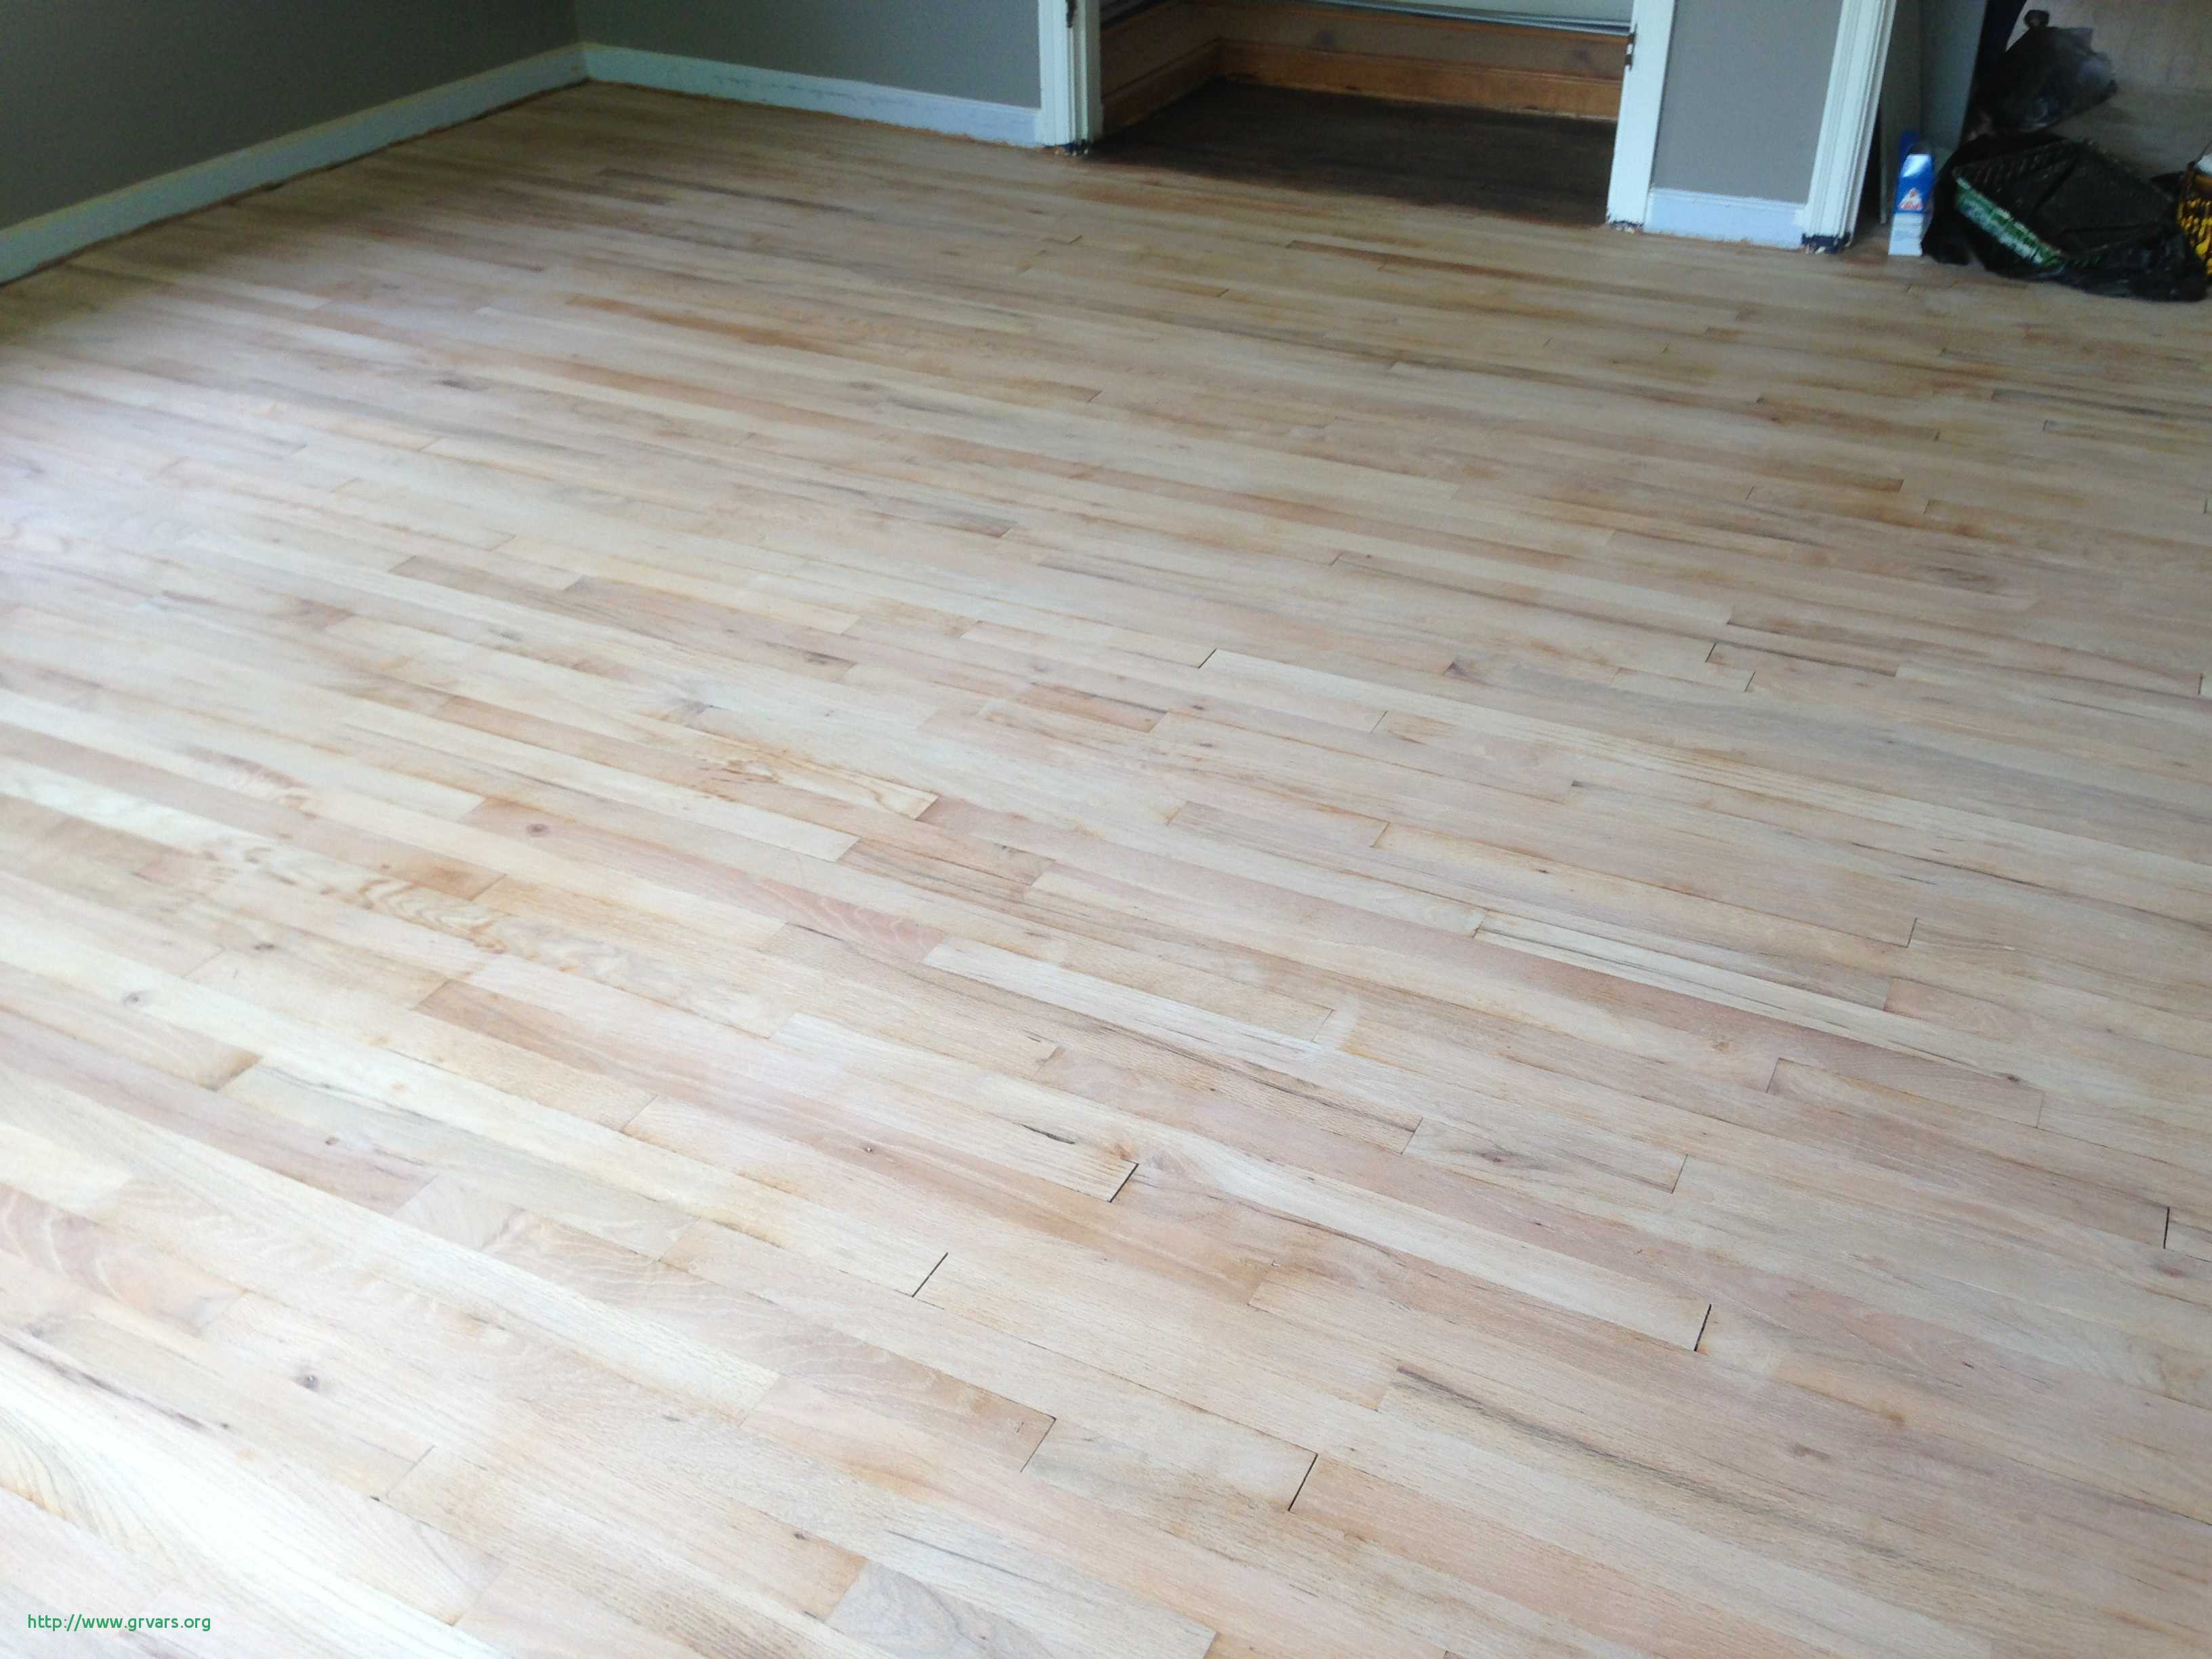 23 Awesome Hardwood Floor Stain Colors Lowes 2024 free download hardwood floor stain colors lowes of 24 nouveau does lowes rent floor sanders ideas blog throughout after tediously sanding the floors we were ready for the next step of staining and sealing